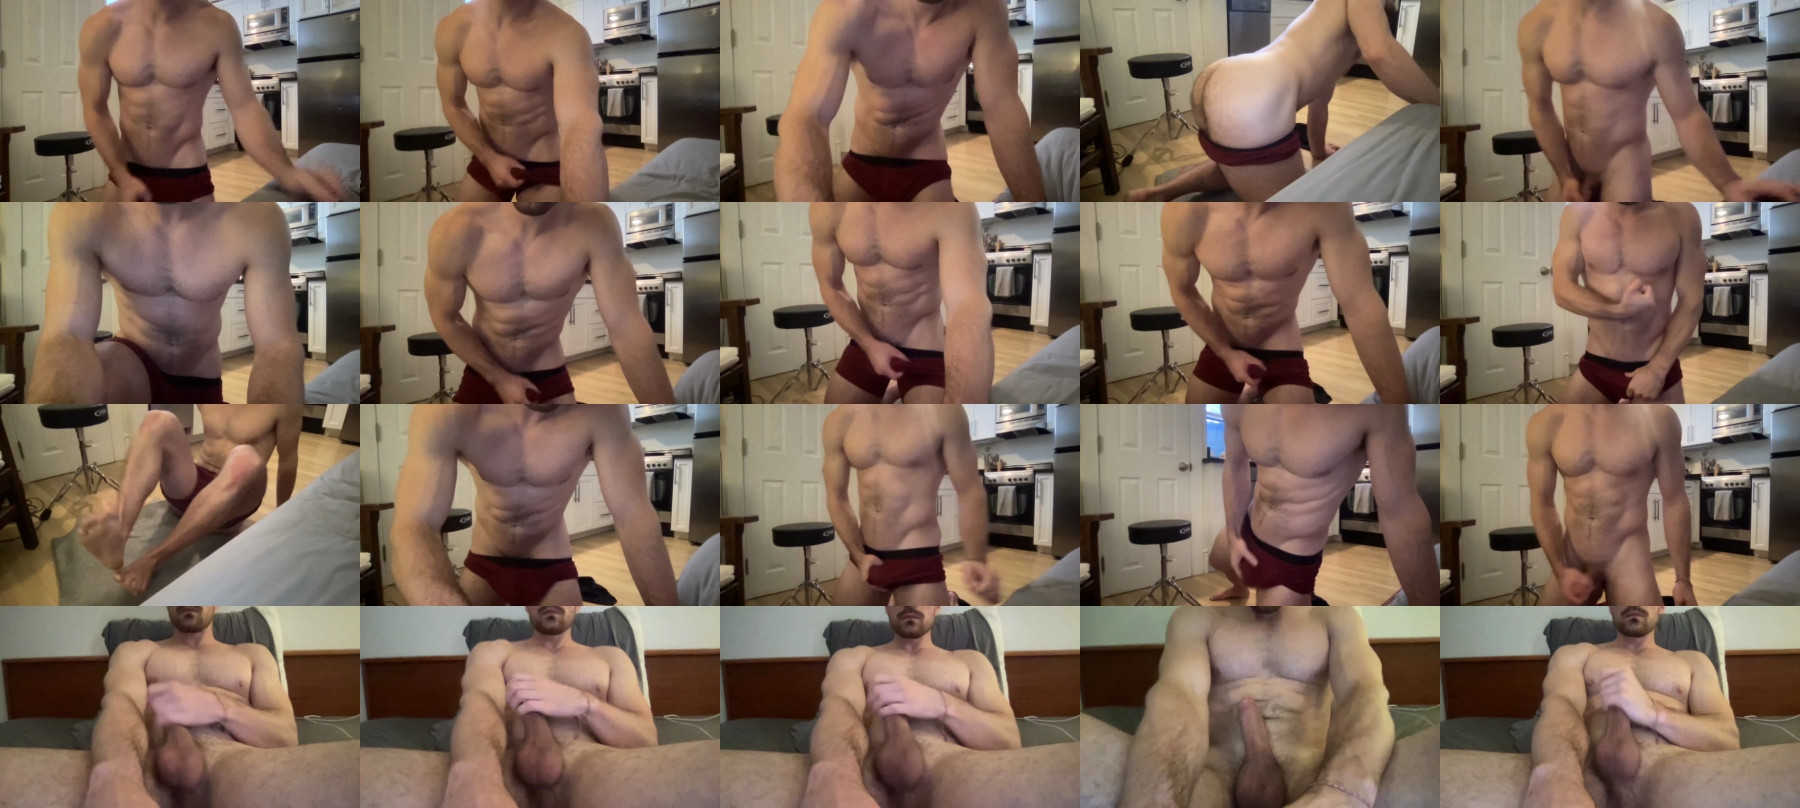 Bigcollegecock69690 Naked CAM SHOW @ Chaturbate 14-04-2021